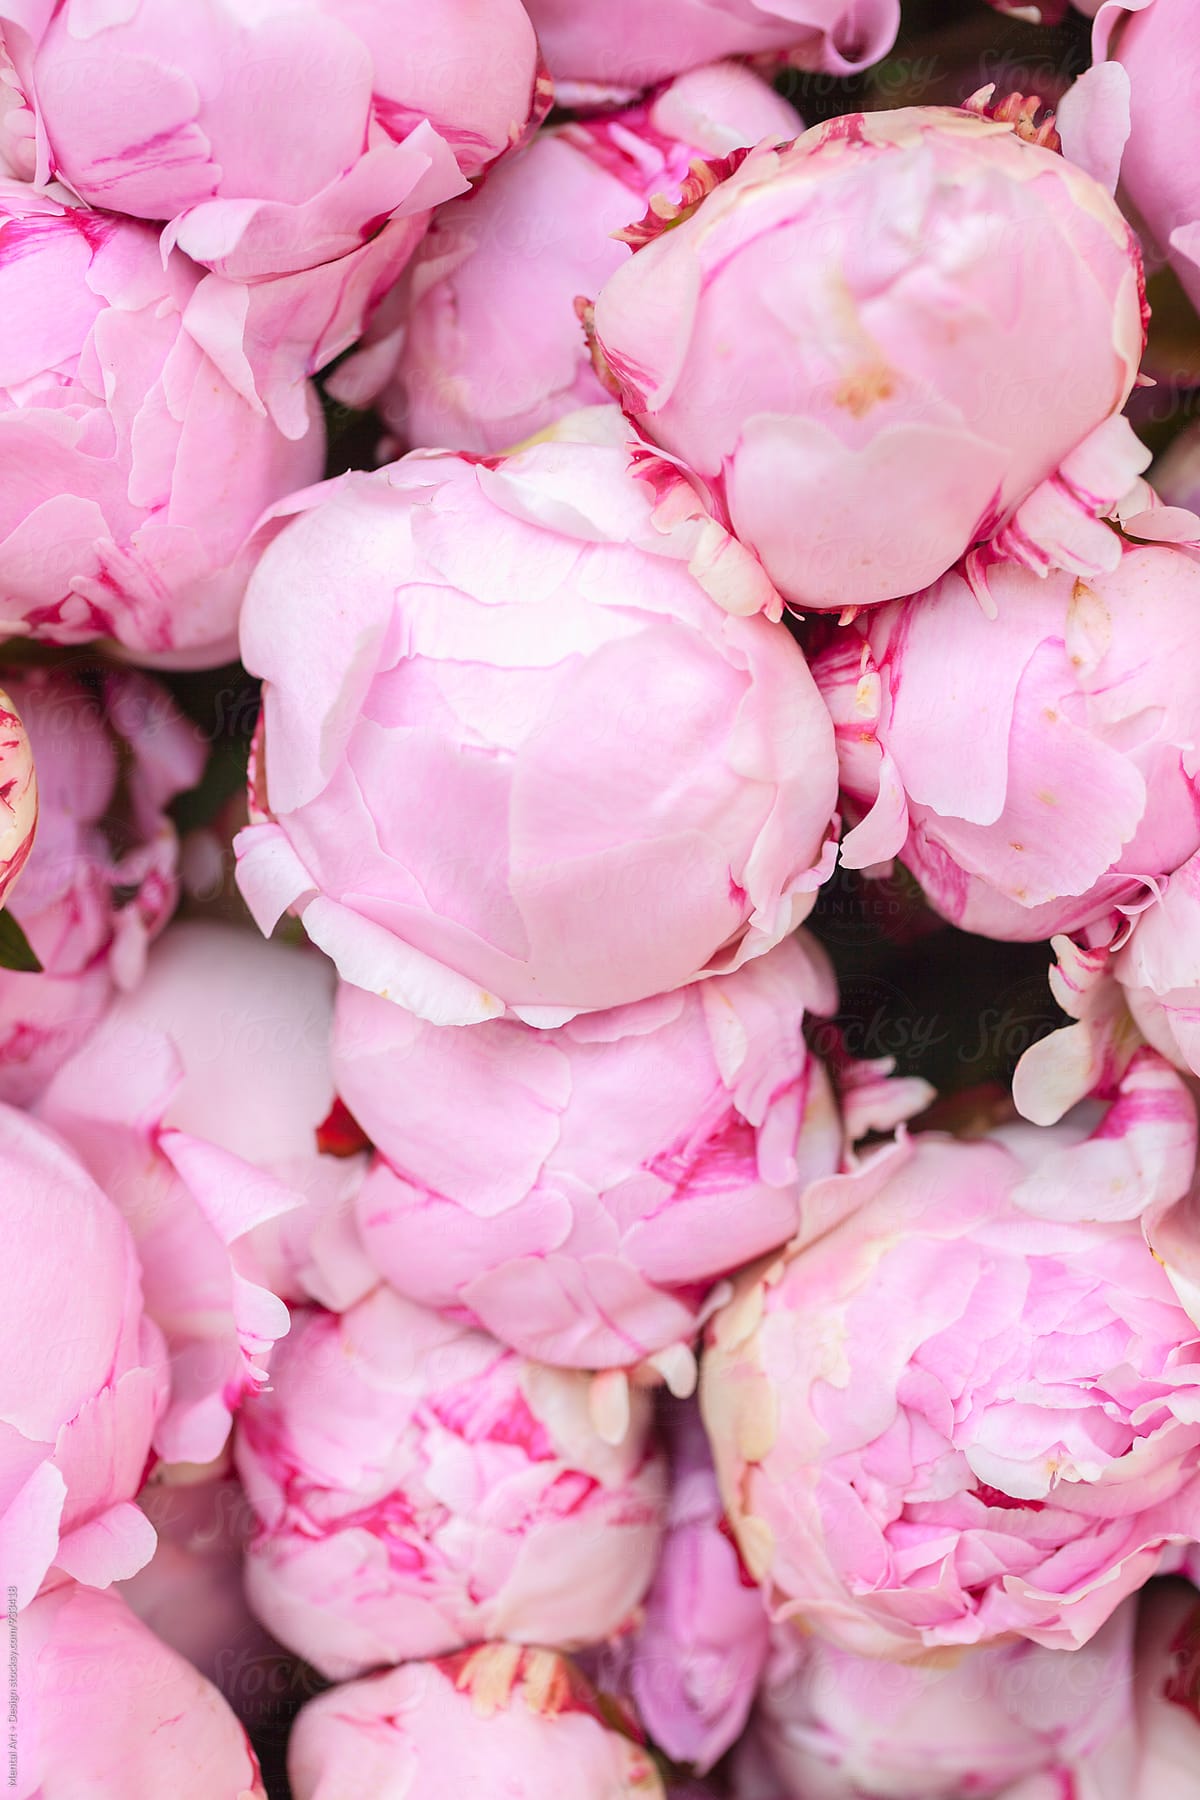 Stacked Peony flowers